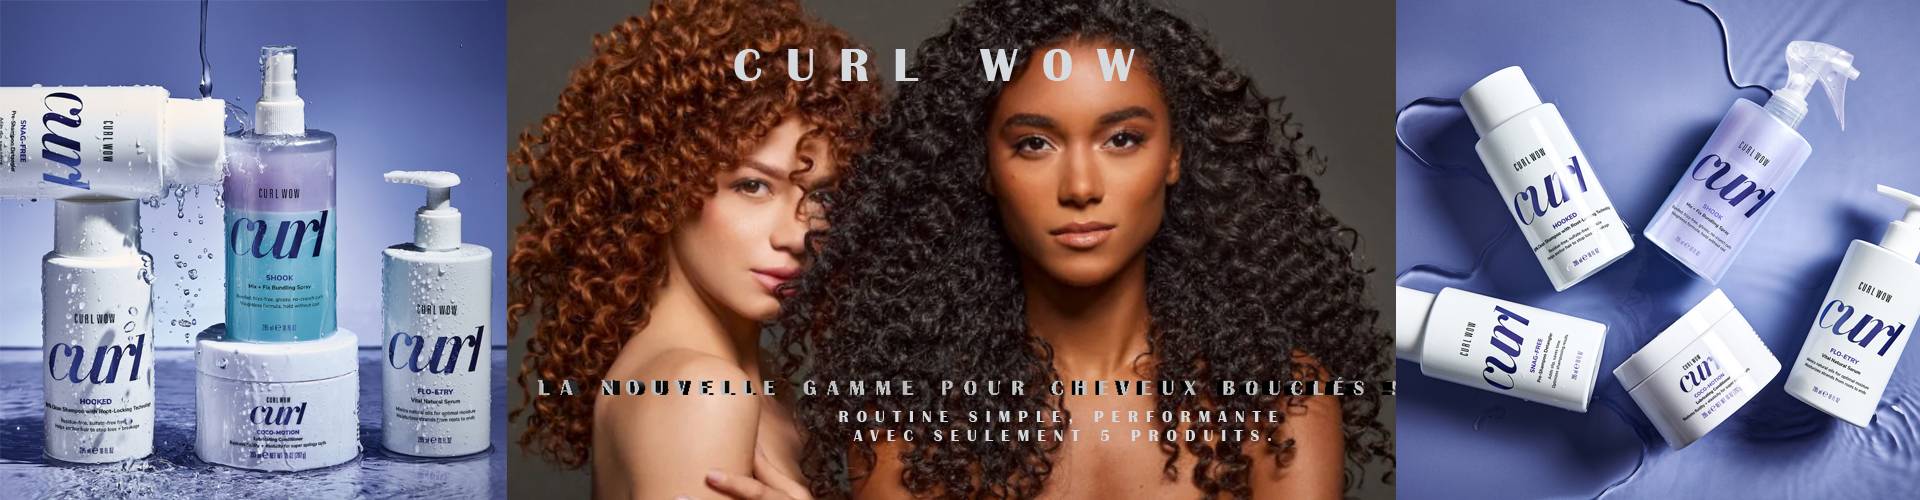 Curl Wow | Gamme Boucles